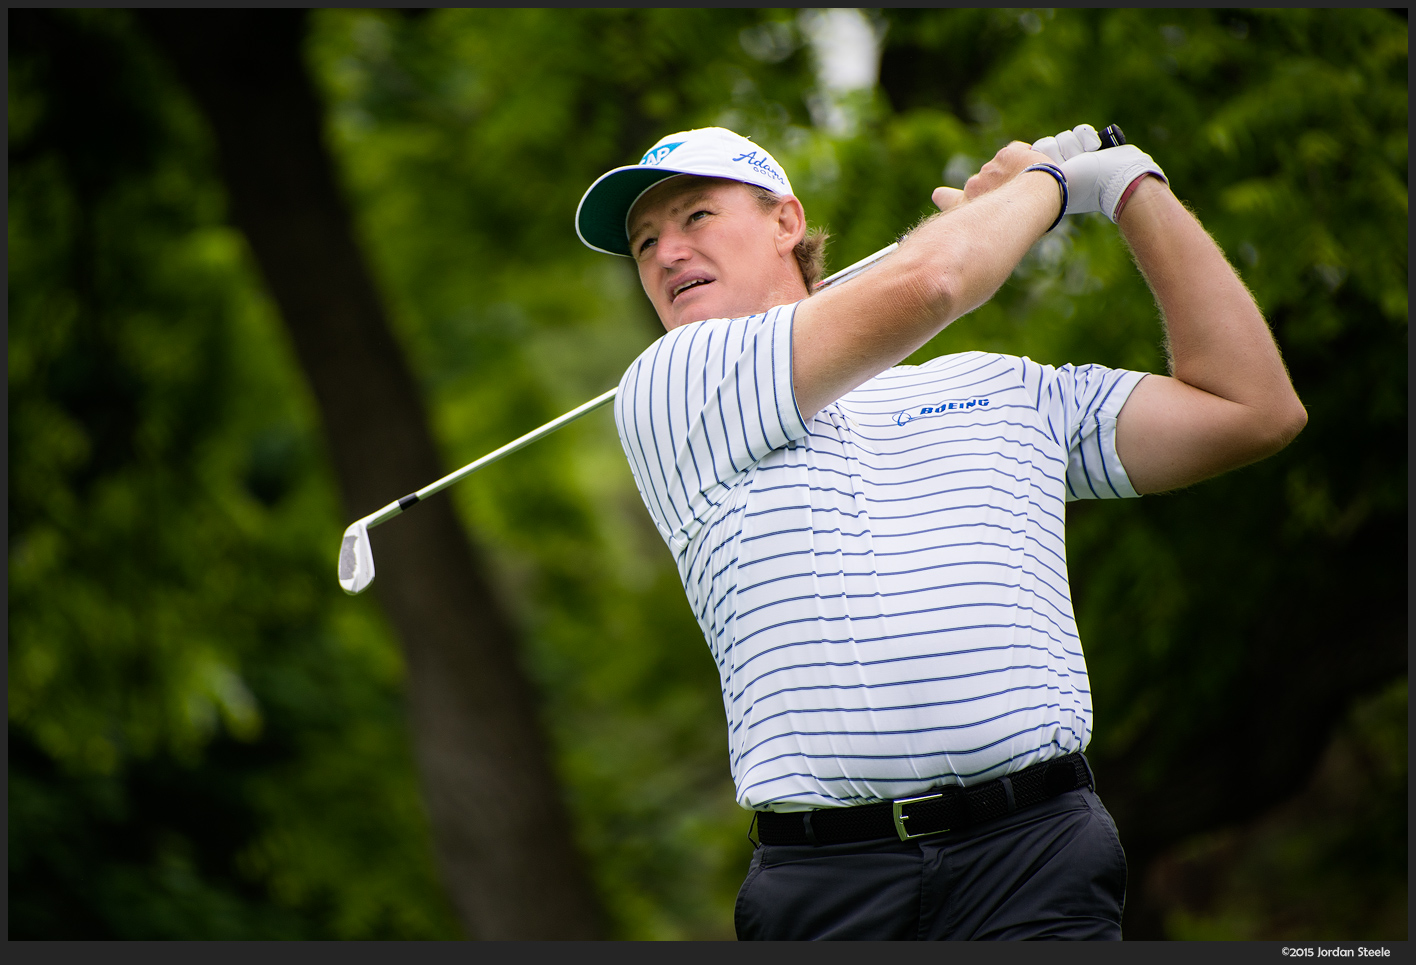 Ernie Els, 4th Hole - Sony A7 II with Canon FD 50-300mm f/4.5L